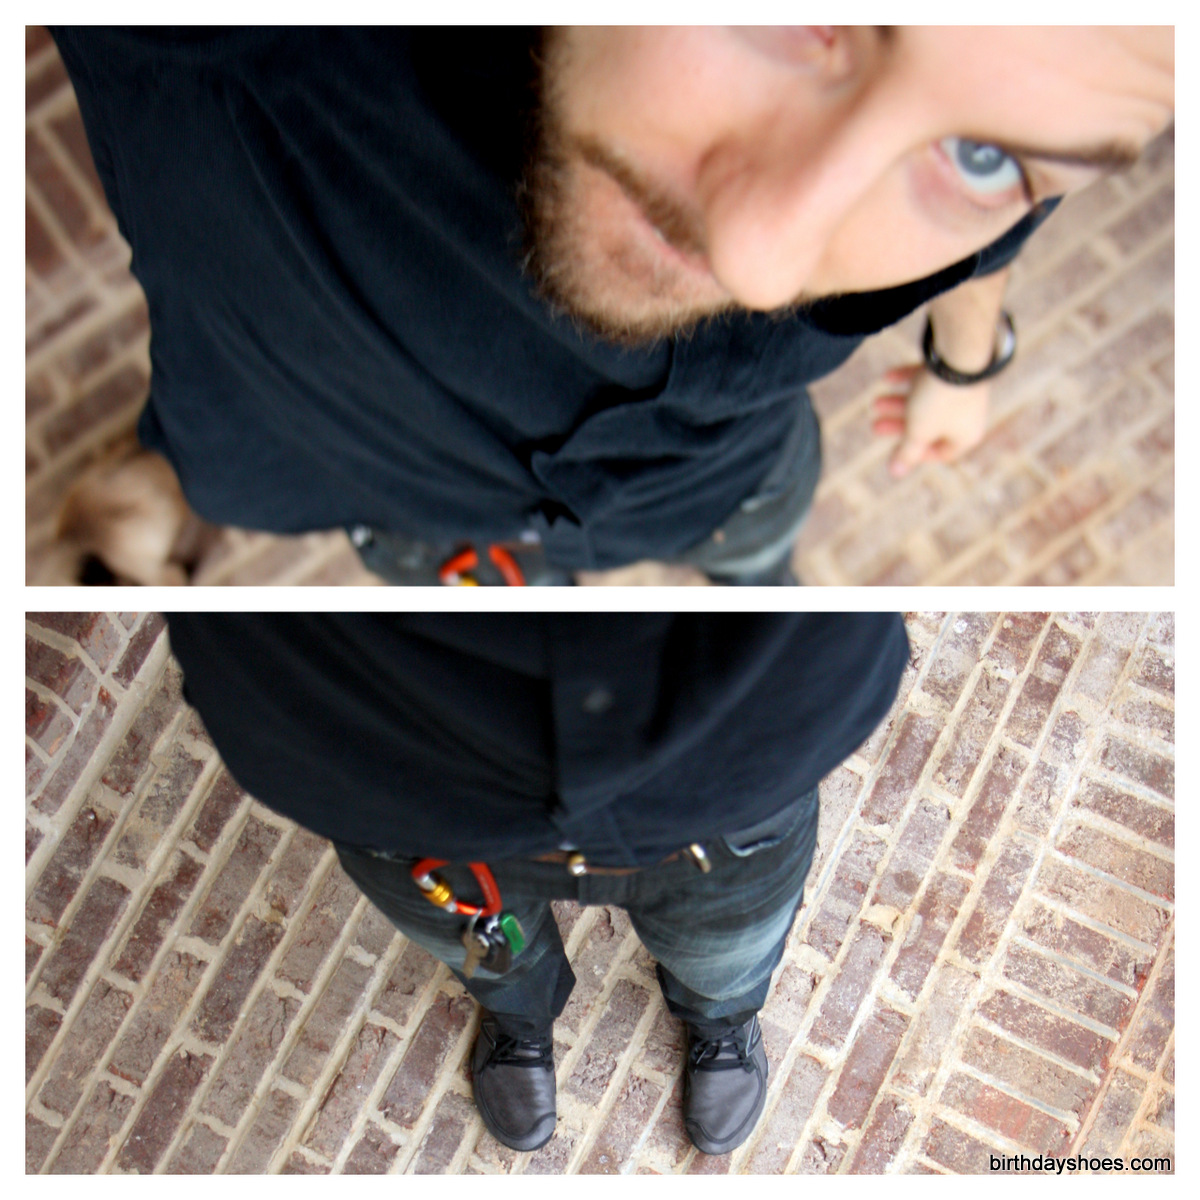 An attempt at a DSLR self-portrait wearing the New Balance Minimus Trail MT10s with jeans.